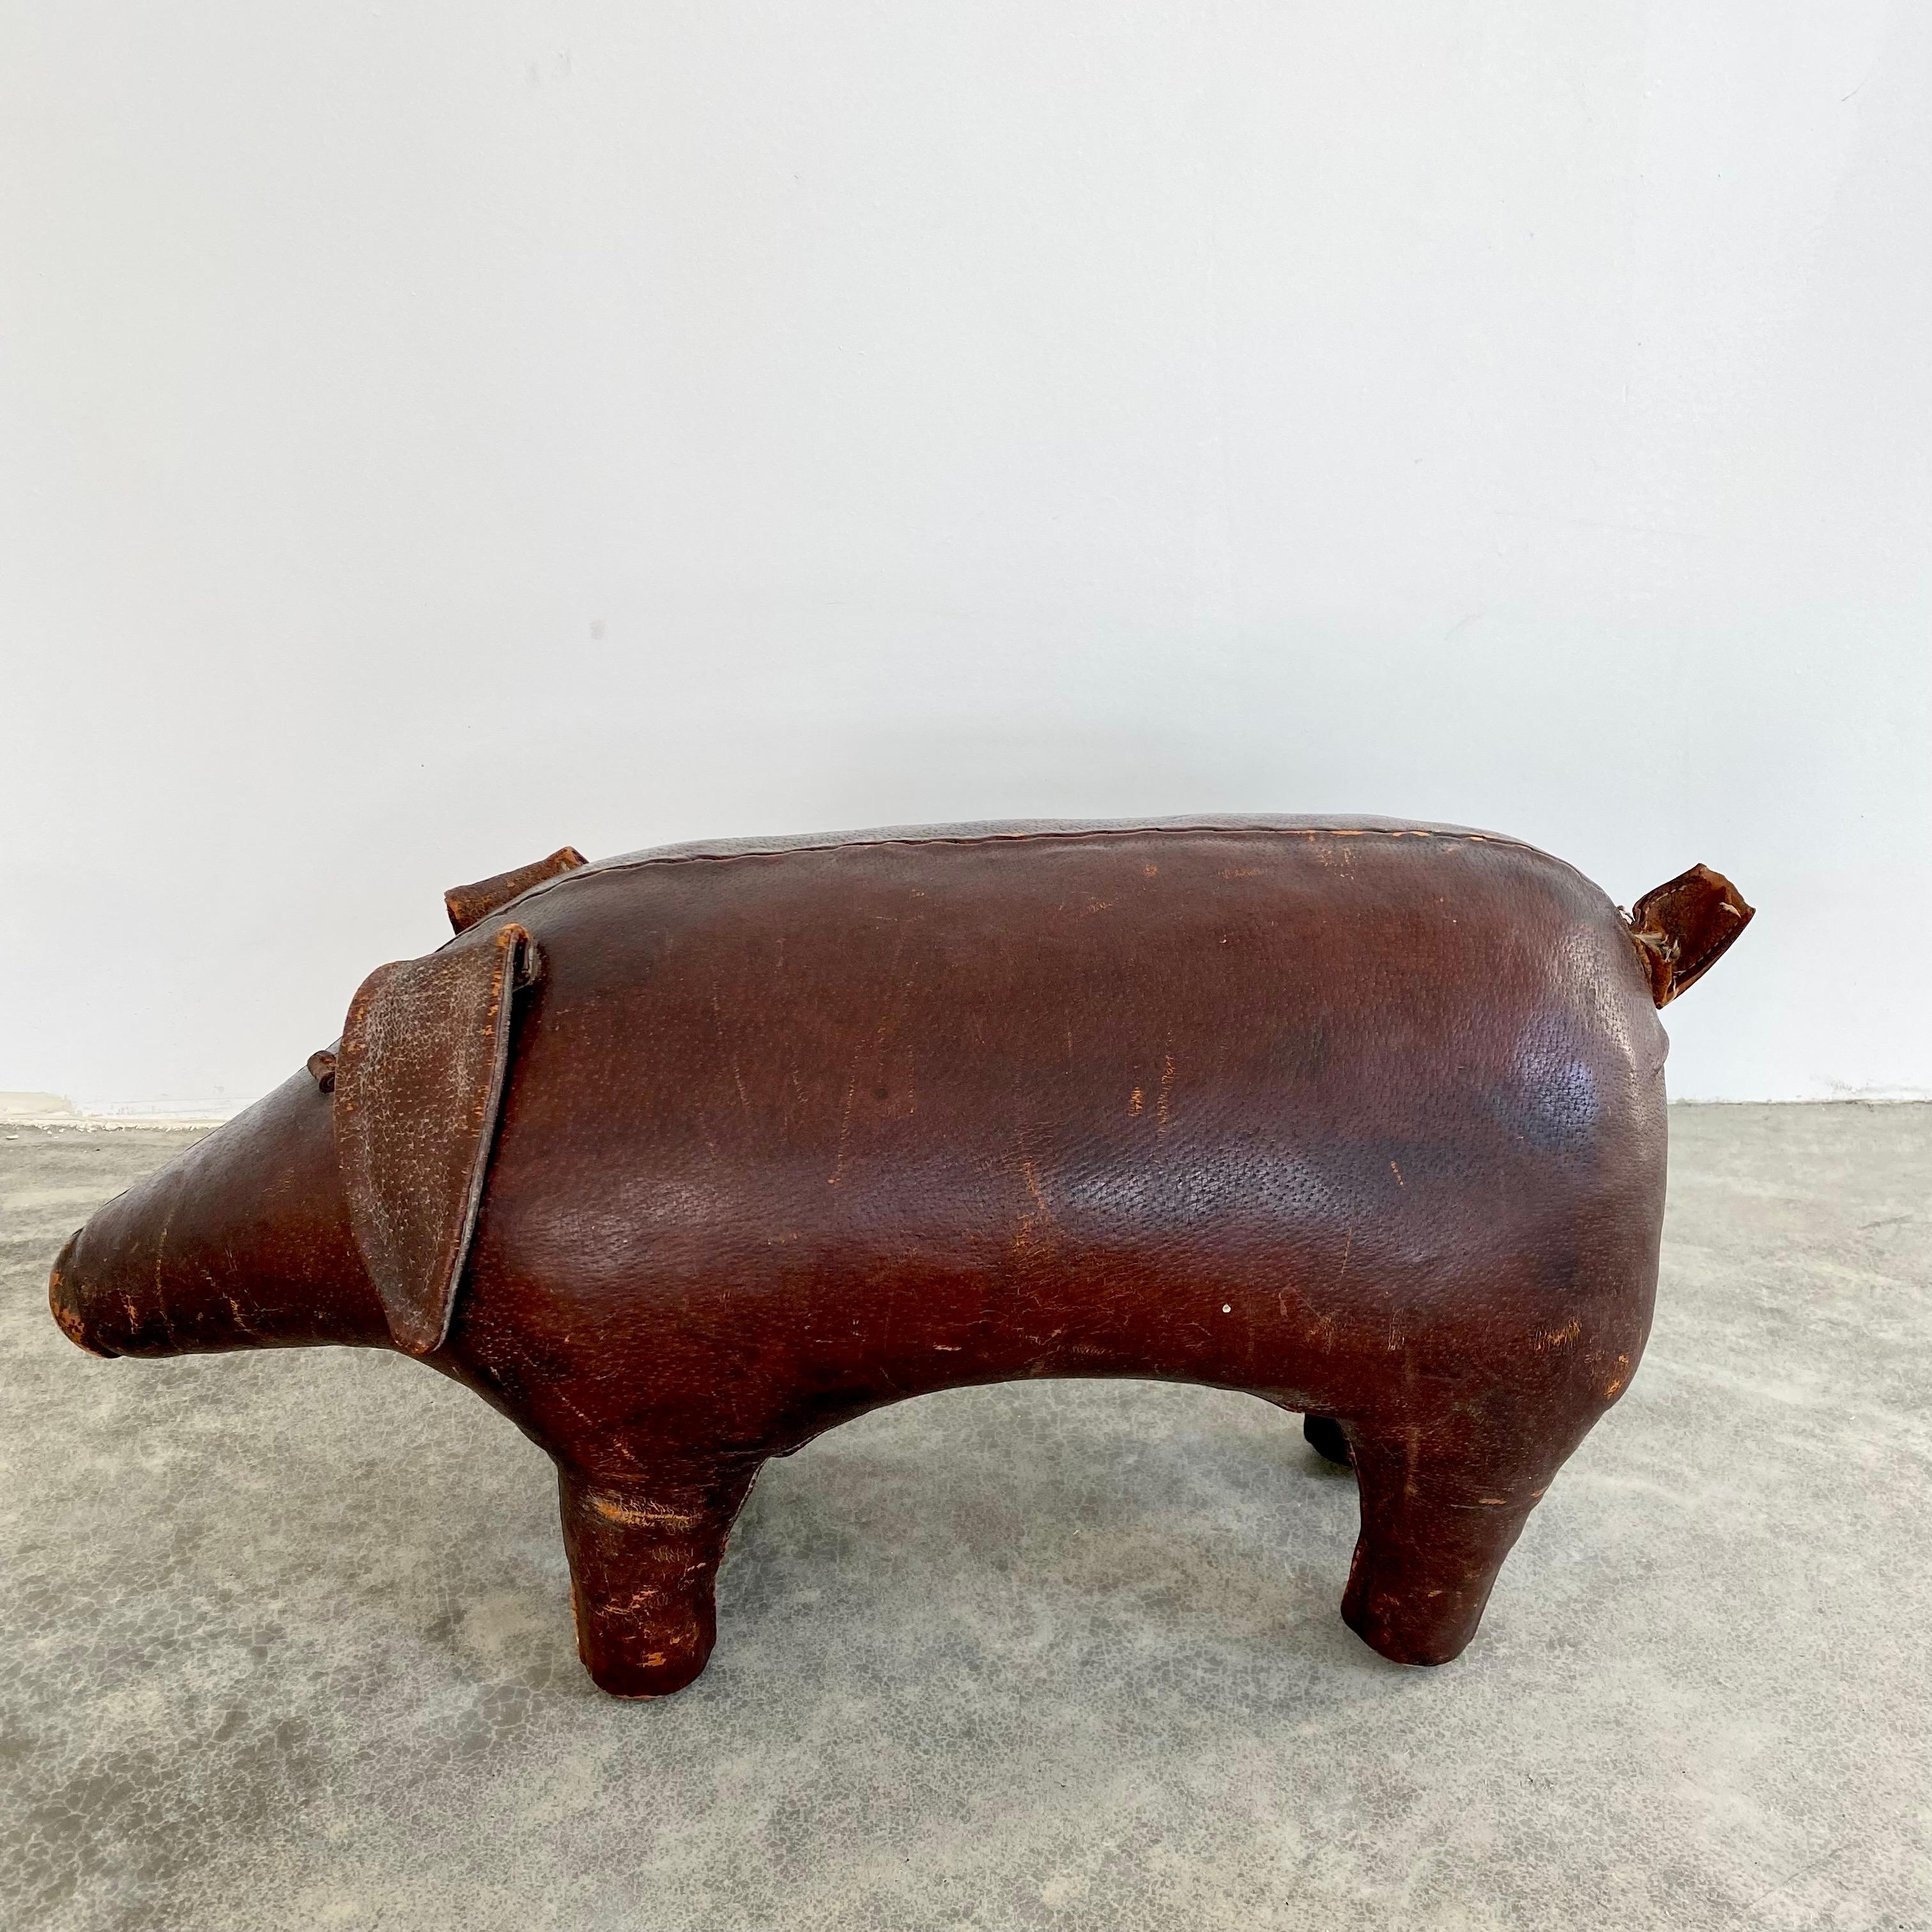 English Omersa Leather Pig For Sale